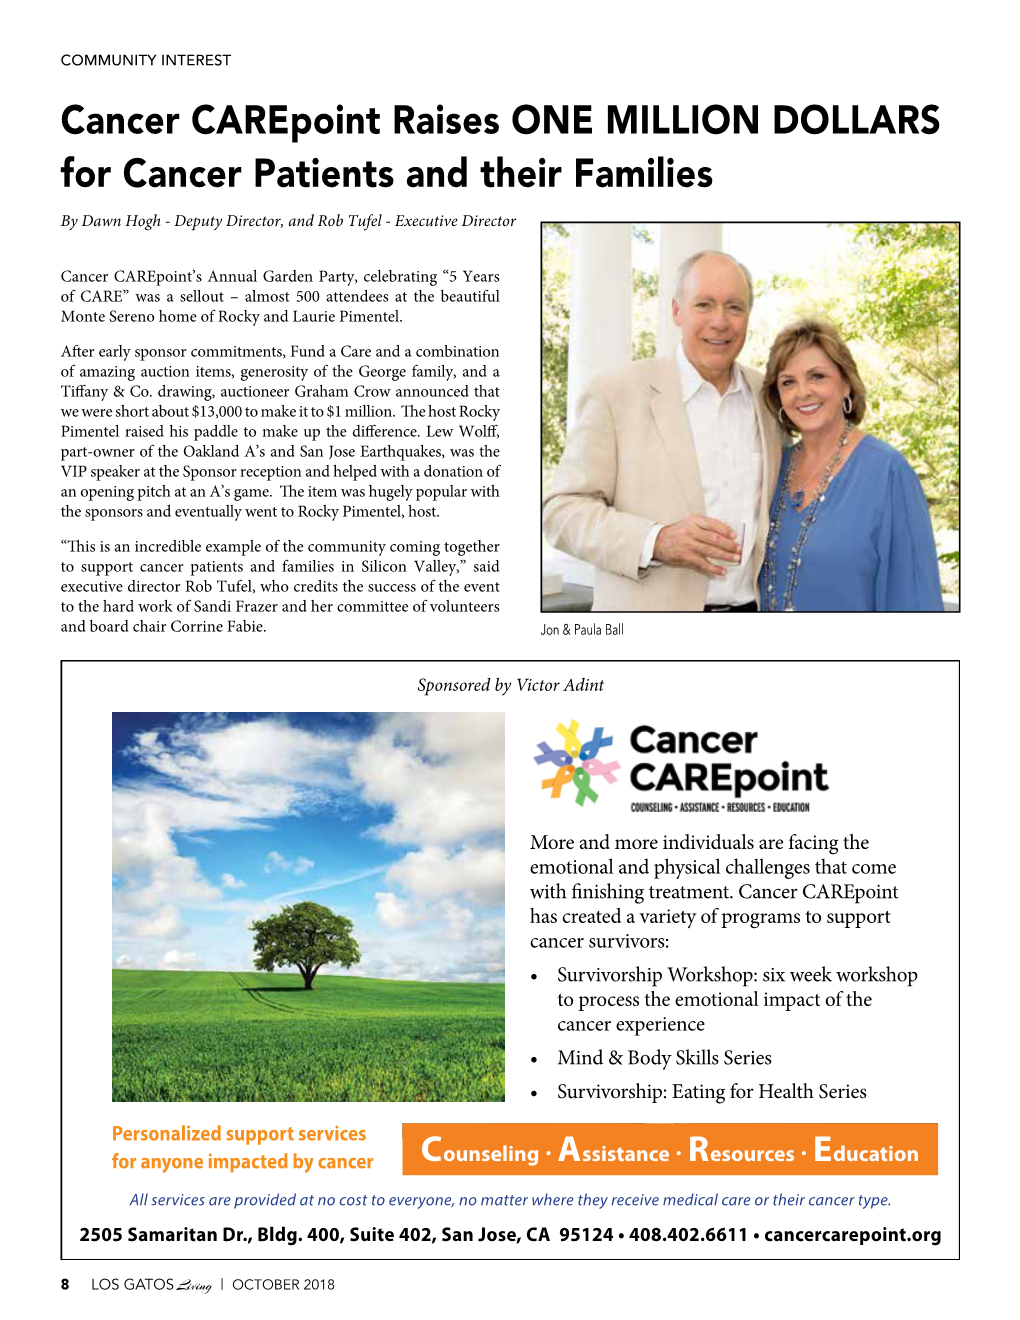 Cancer Carepoint Raises ONE MILLION DOLLARS for Cancer Patients and Their Families by Dawn Hogh - Deputy Director, and Rob Tufel - Executive Director